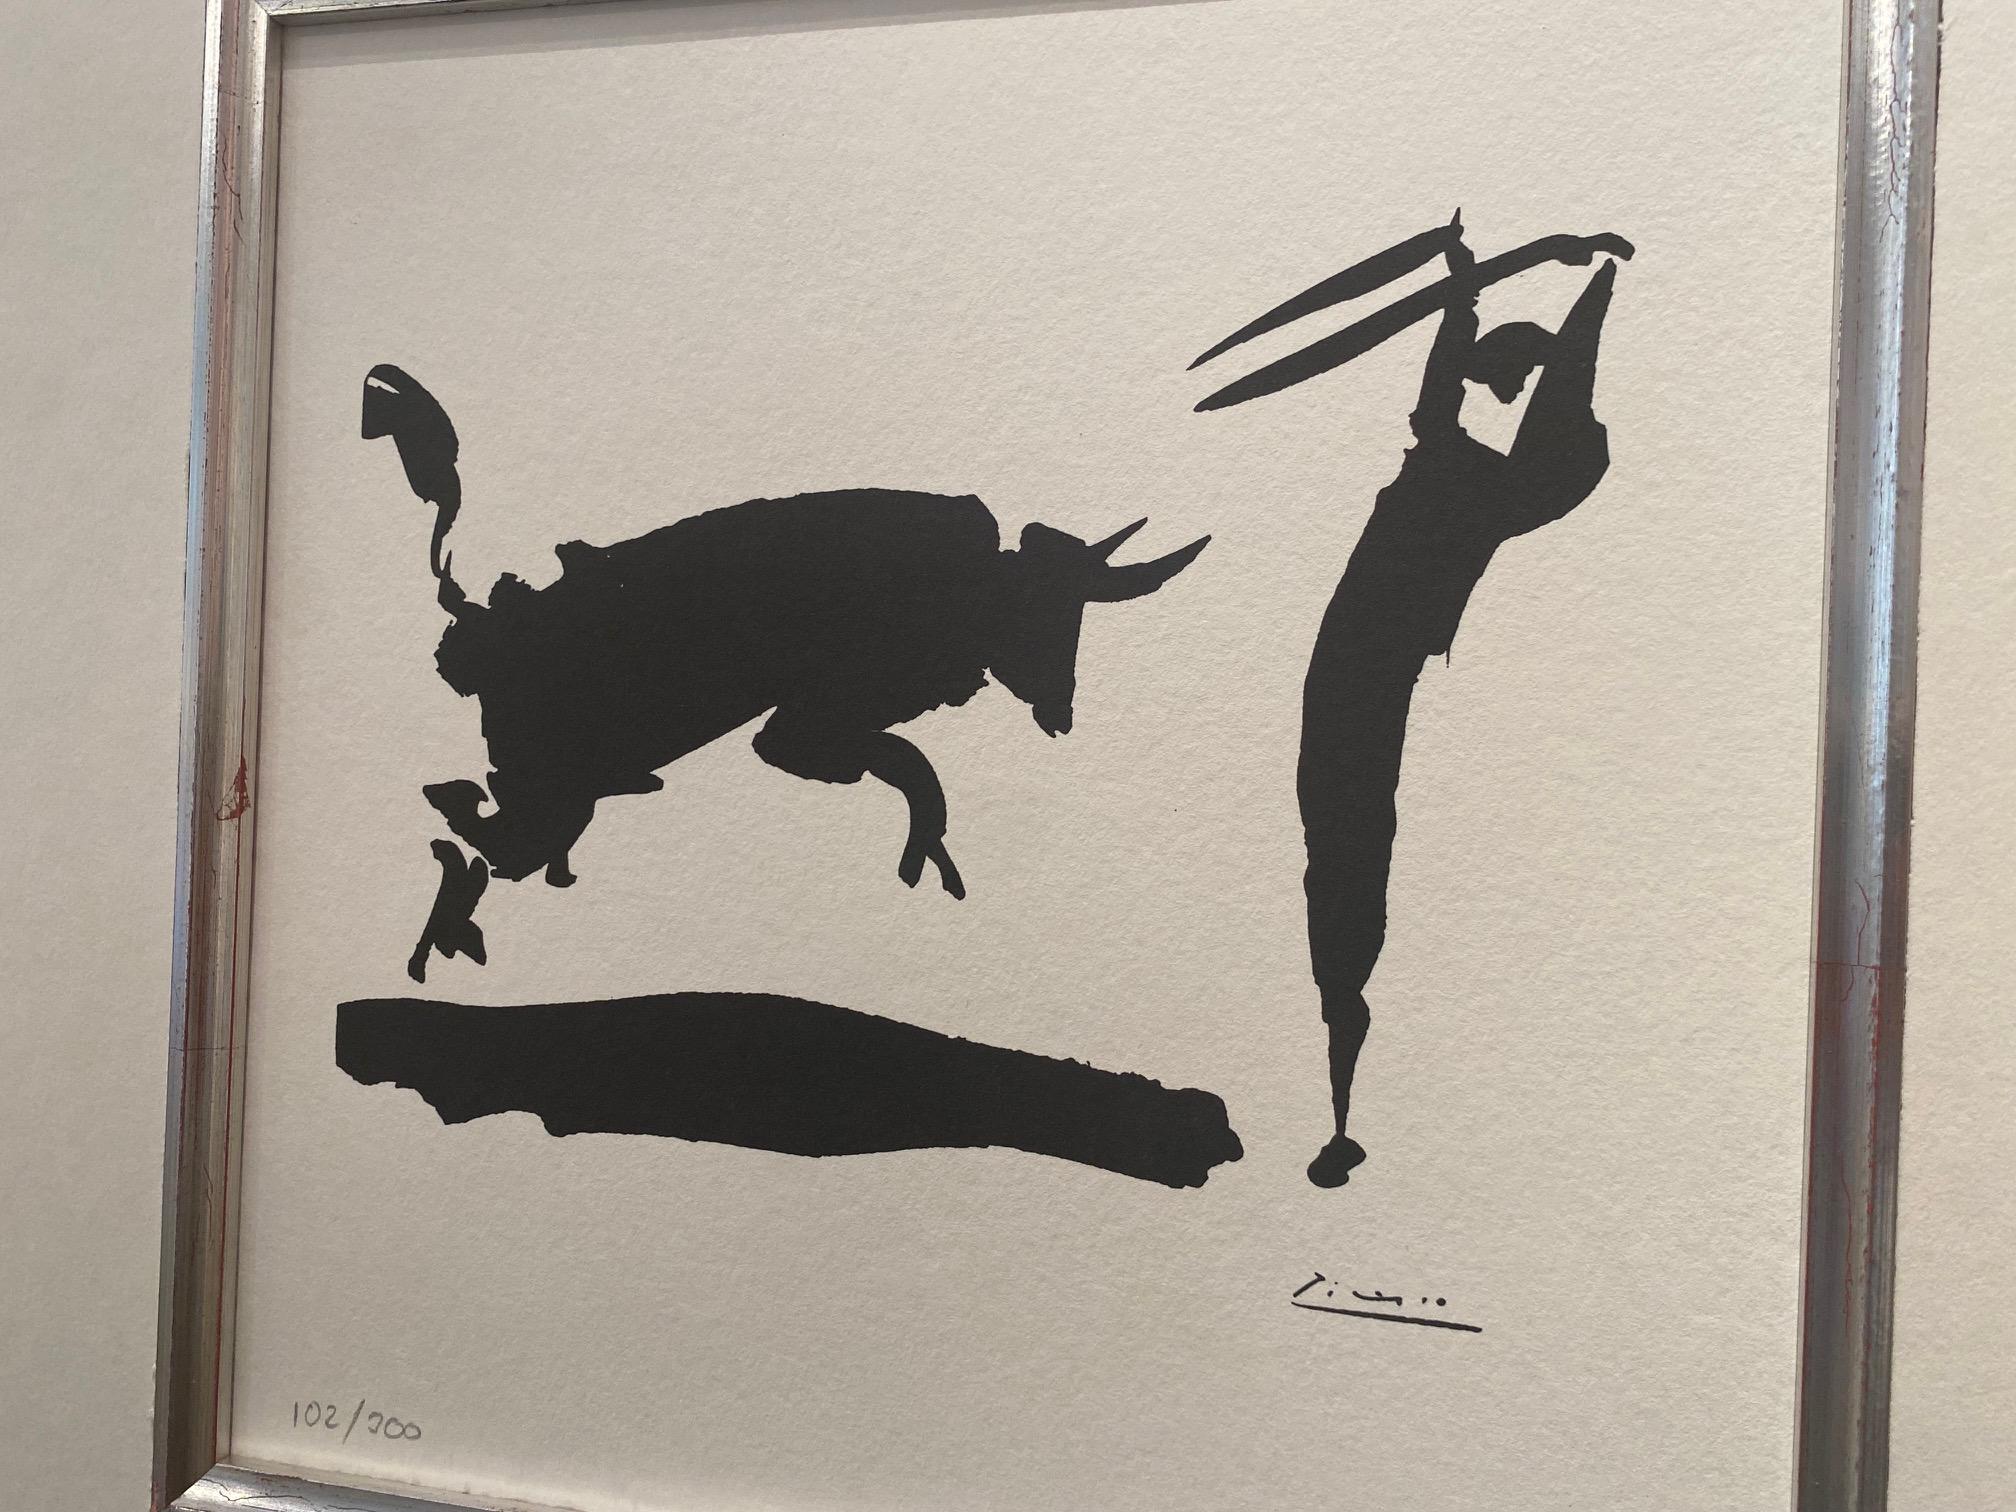 Bullfight - from Pablo Picasso's bullfighting series, signed in the plate  1